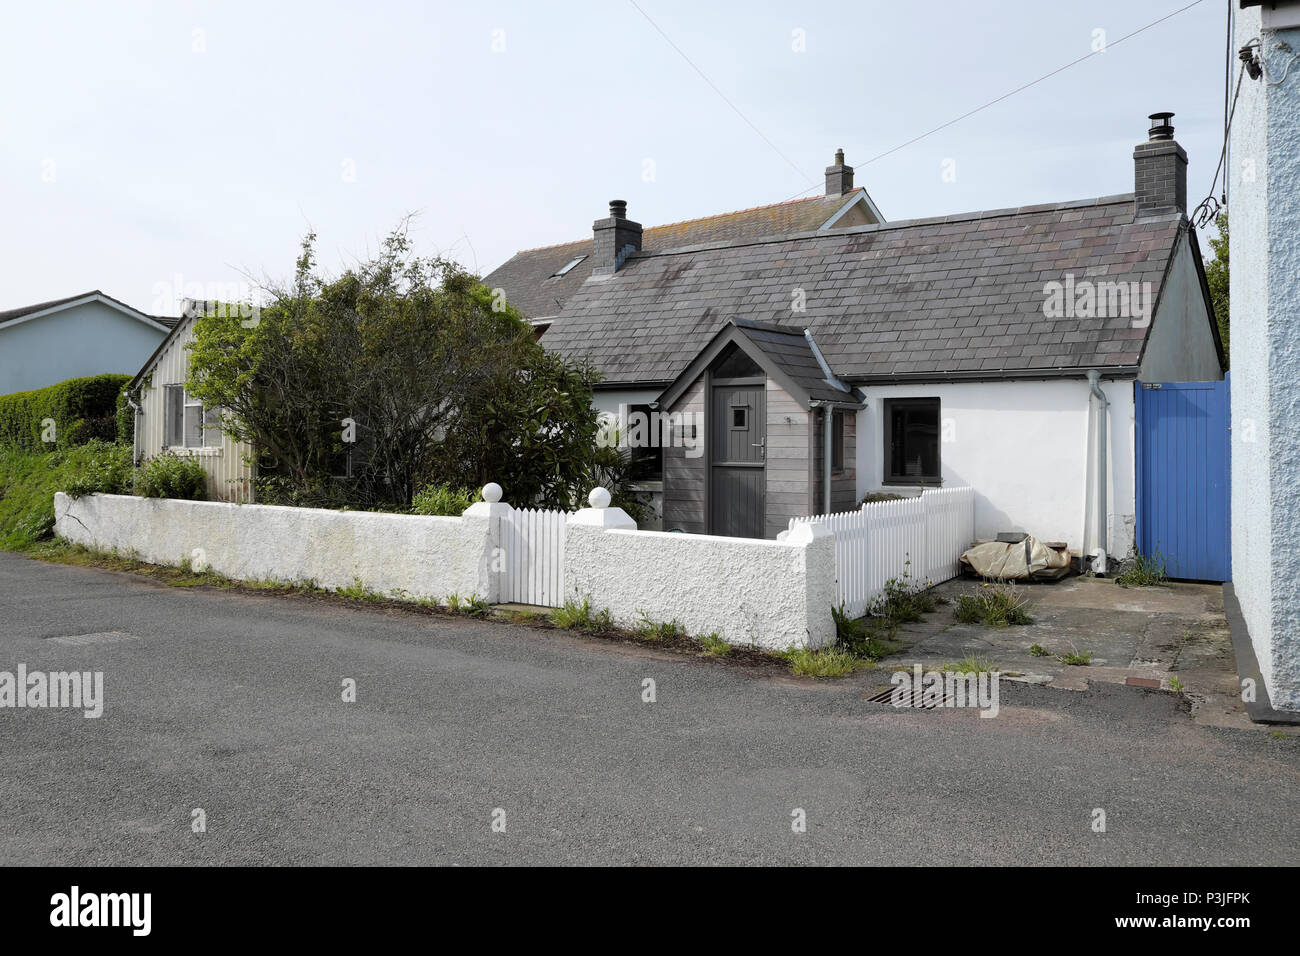 A small modernised cottage with a white stone wall and picket gate and fence in the village Marloes Pembrokeshire West WalesWales, UK  KATHY DEWITT Stock Photo